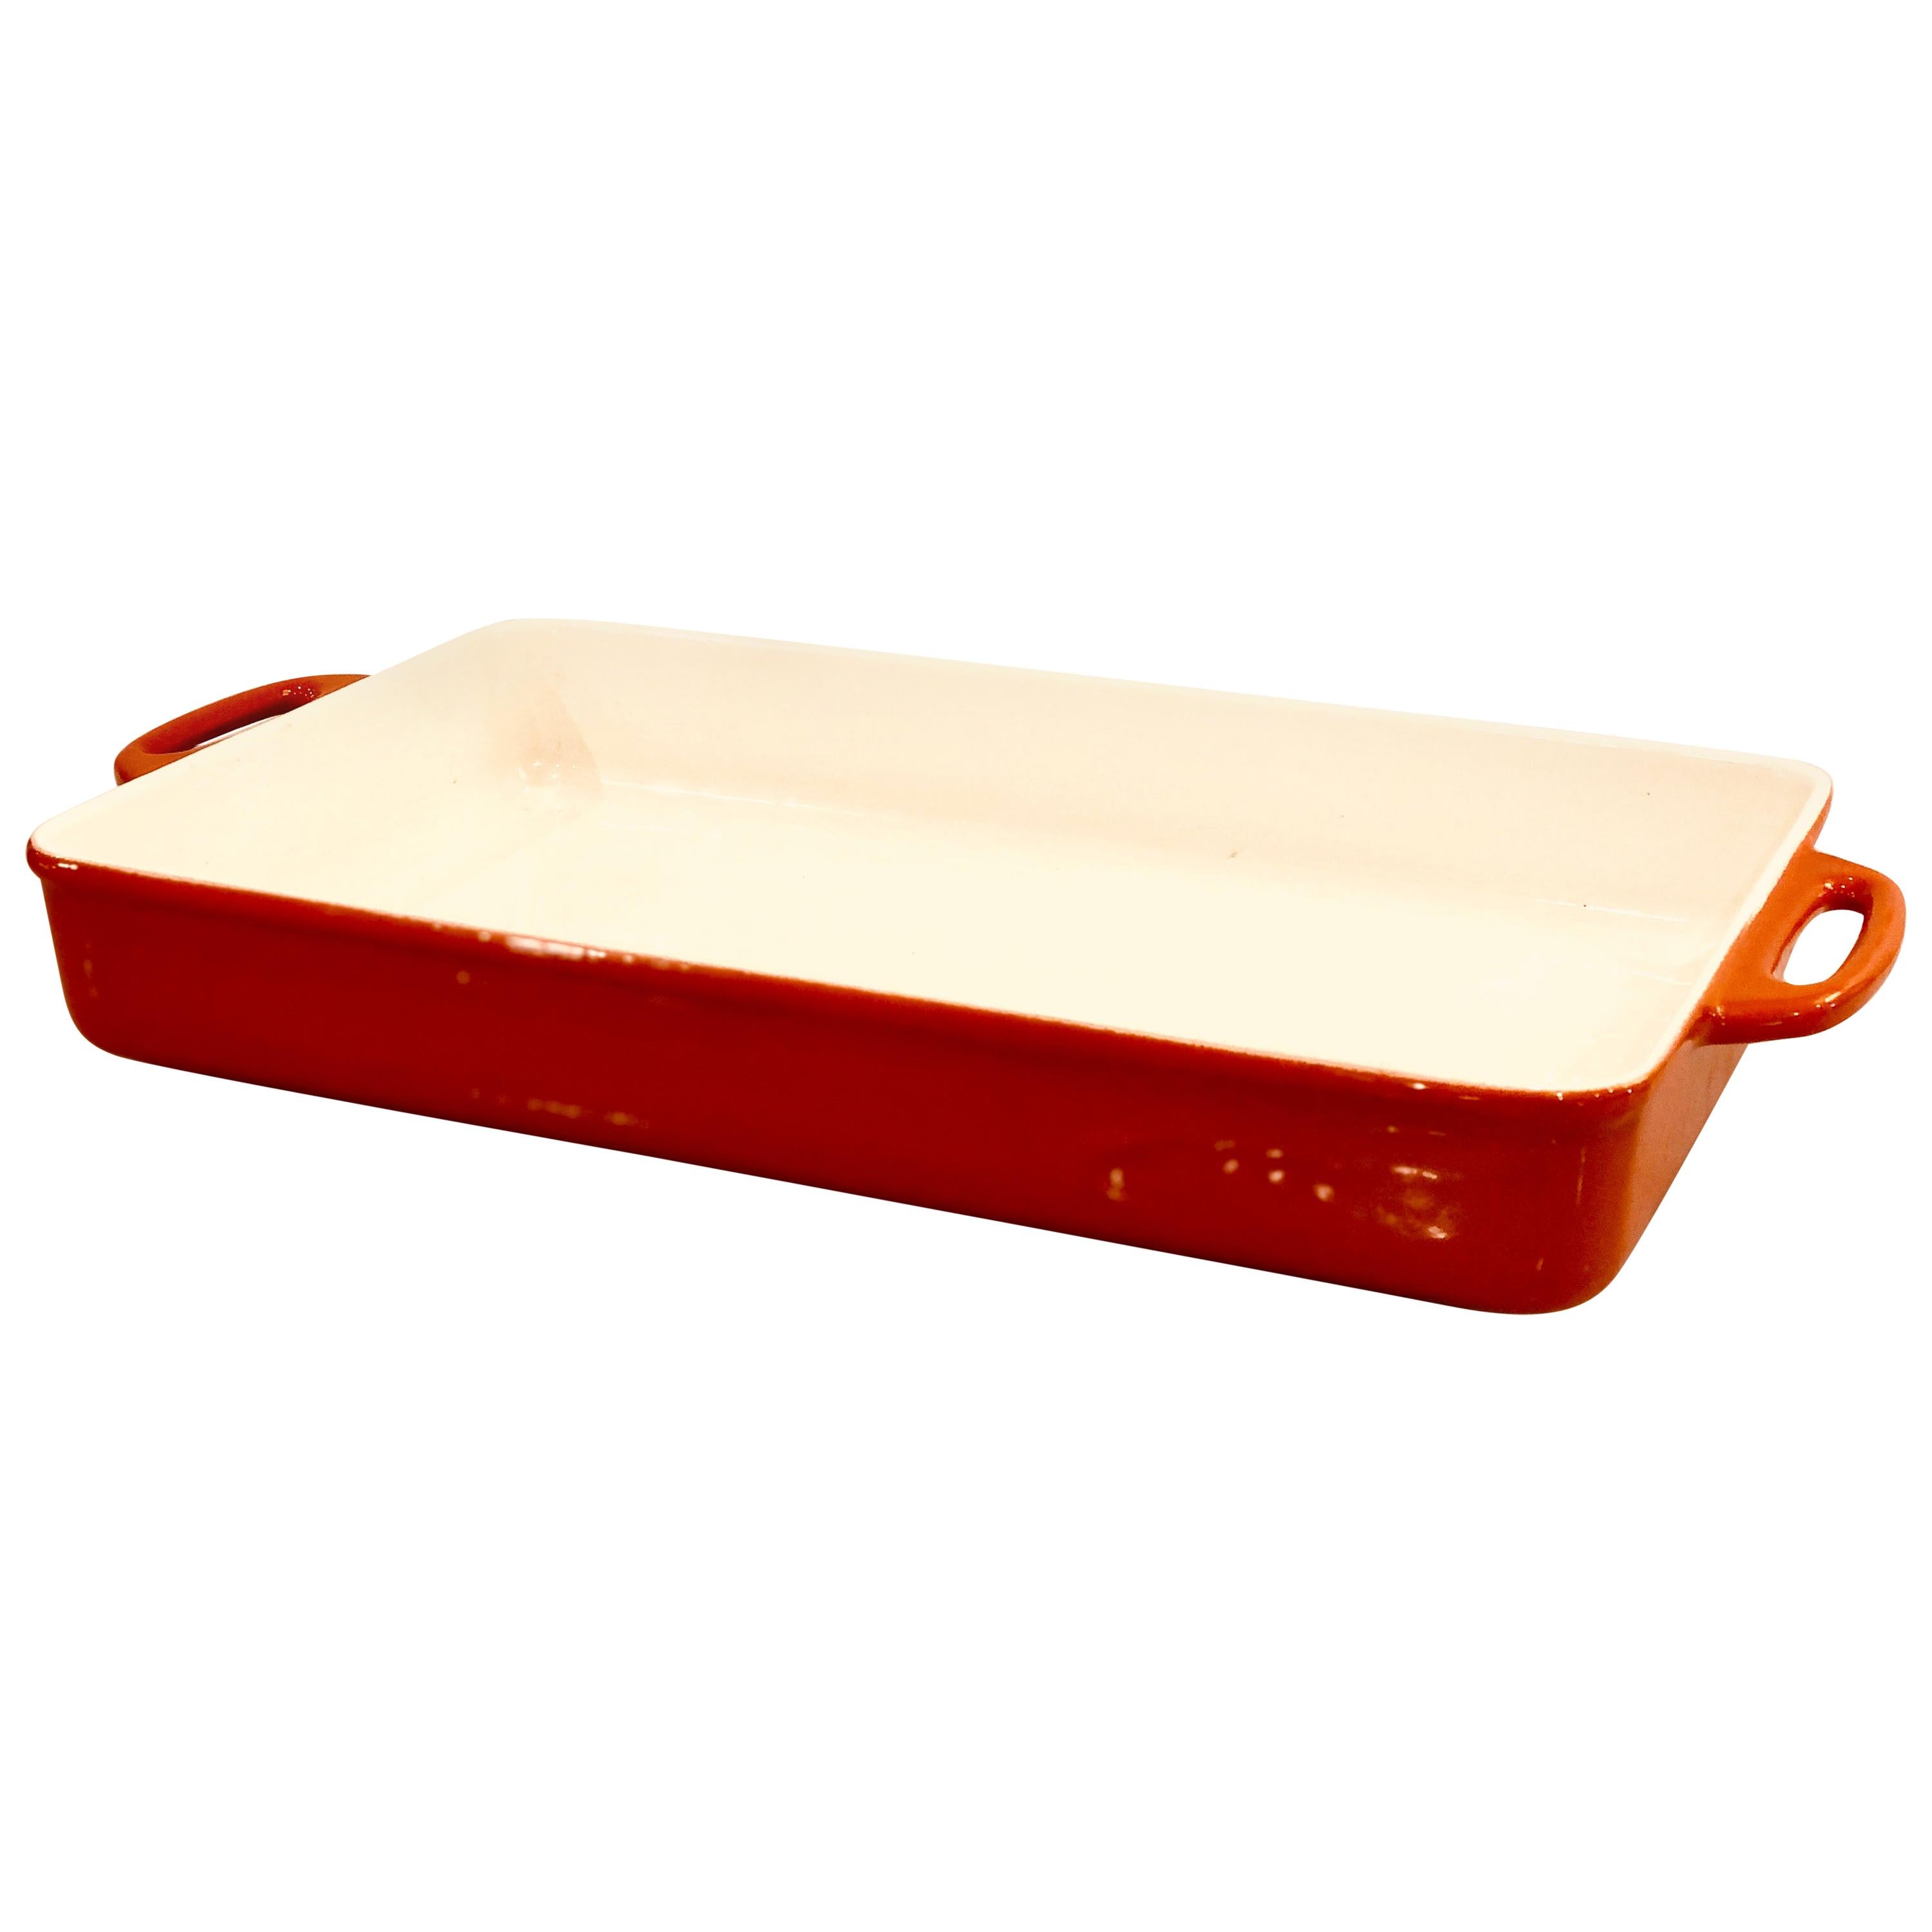 Orange Enameled Cookware Casserole by Copco Designed by Michael Lax